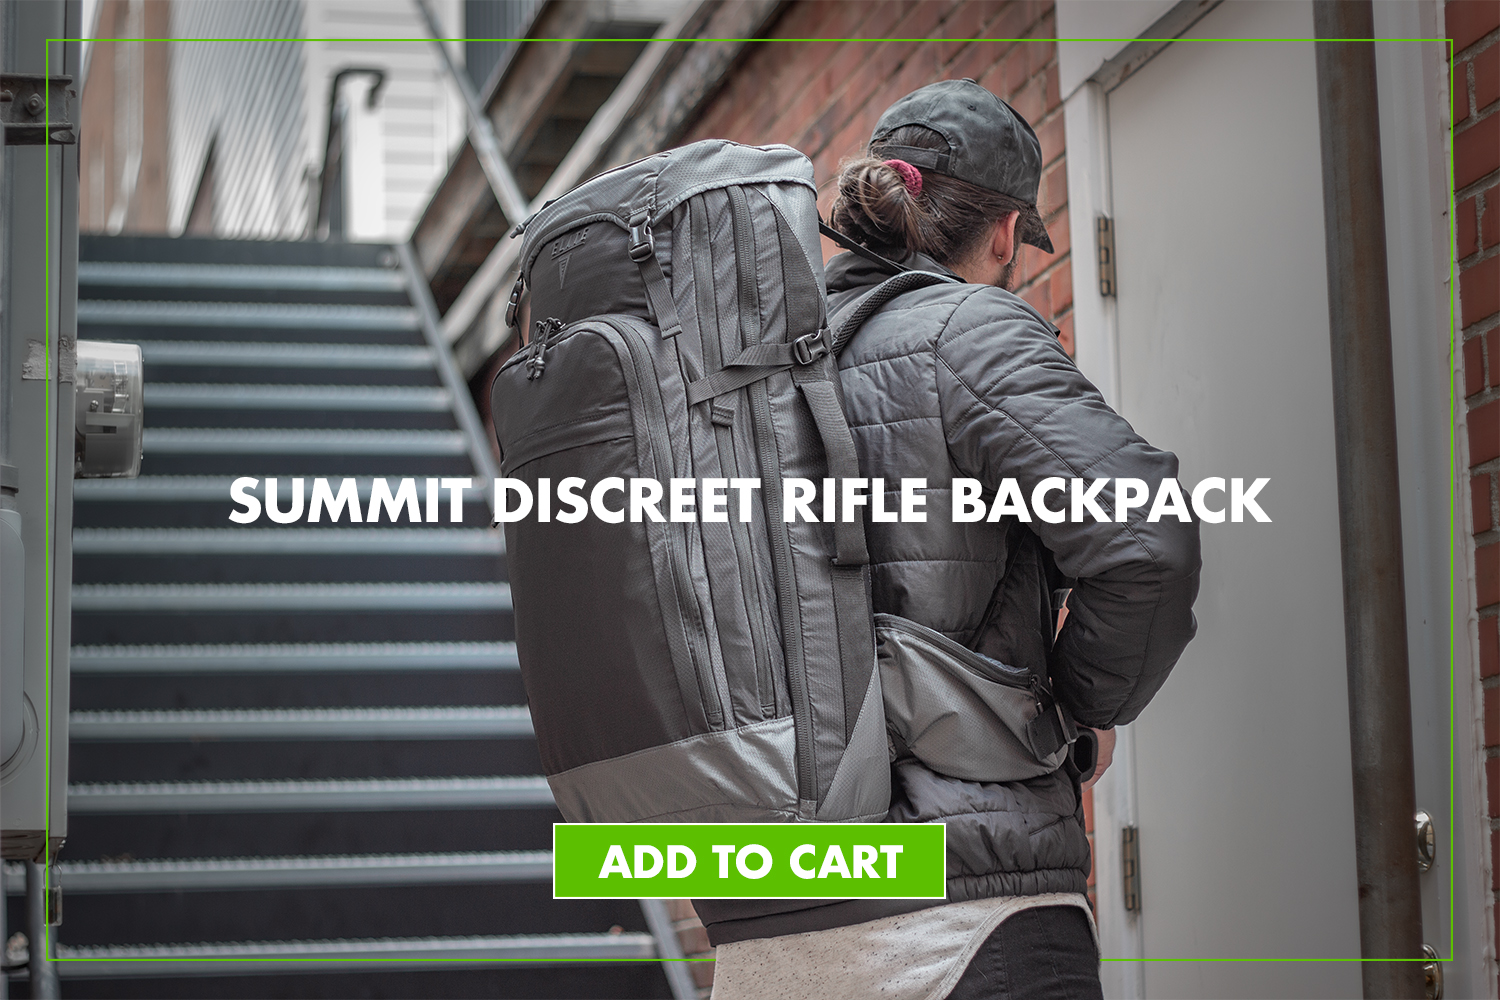 Elite Survival Summit Discreet Rifle Backpack - The perfect pack for discreetly transporting your rifle